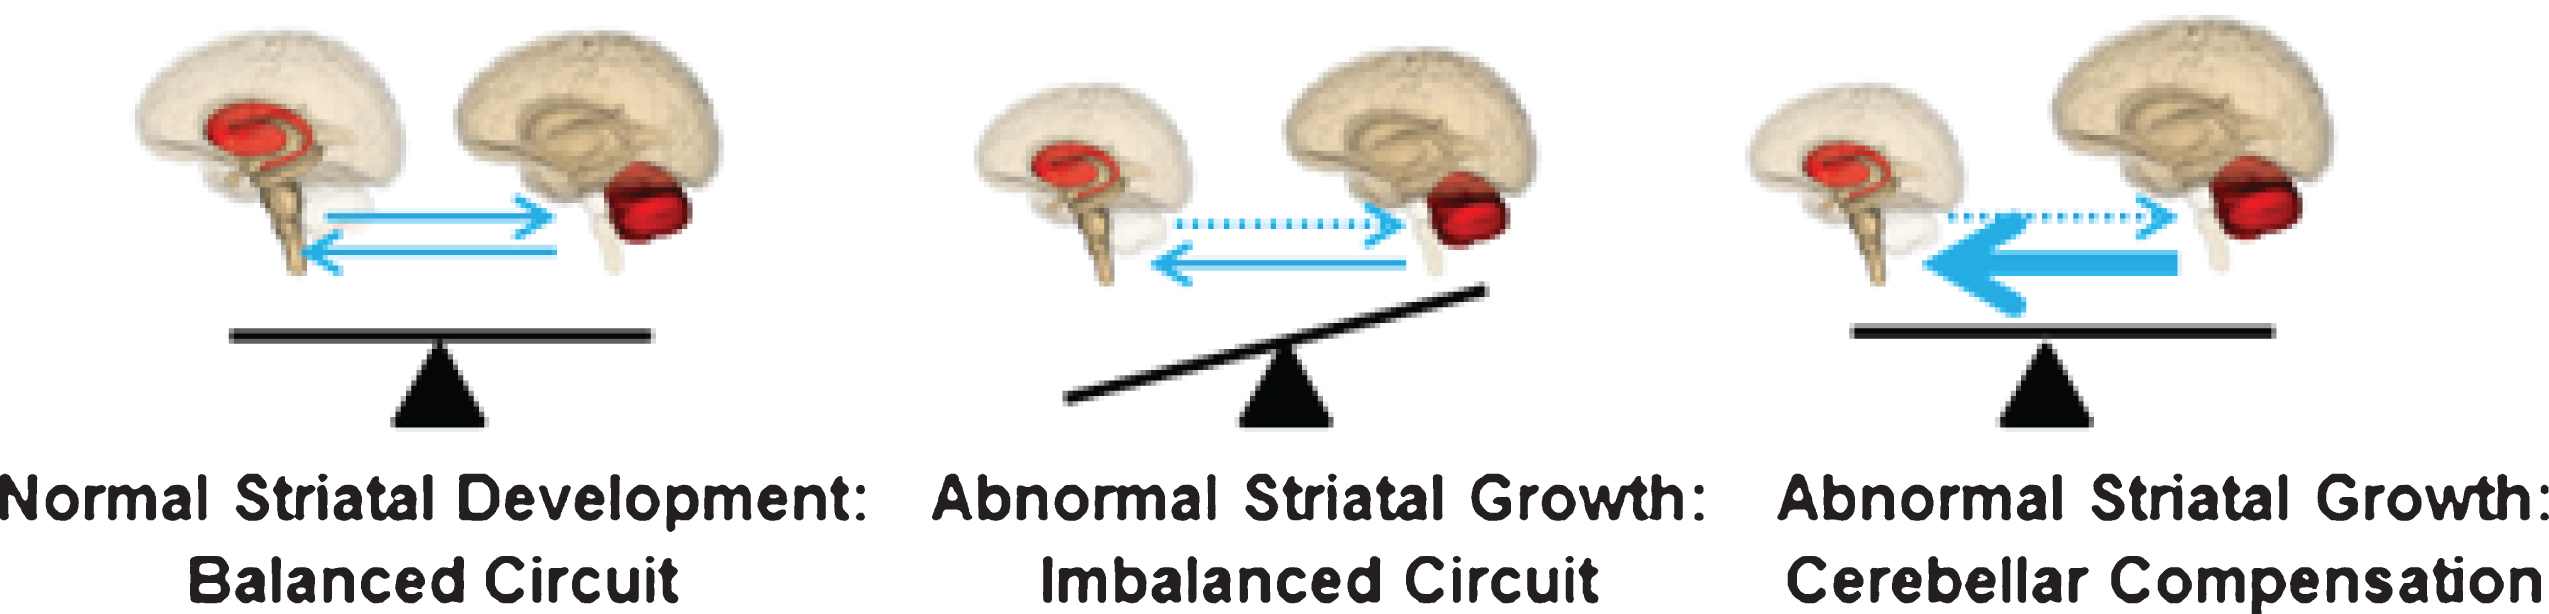 Model of cerebellar compensation of the abnormally developed striatum in HD. The compensation allows for normal motor function and maintains the striatum in mutant steady state.